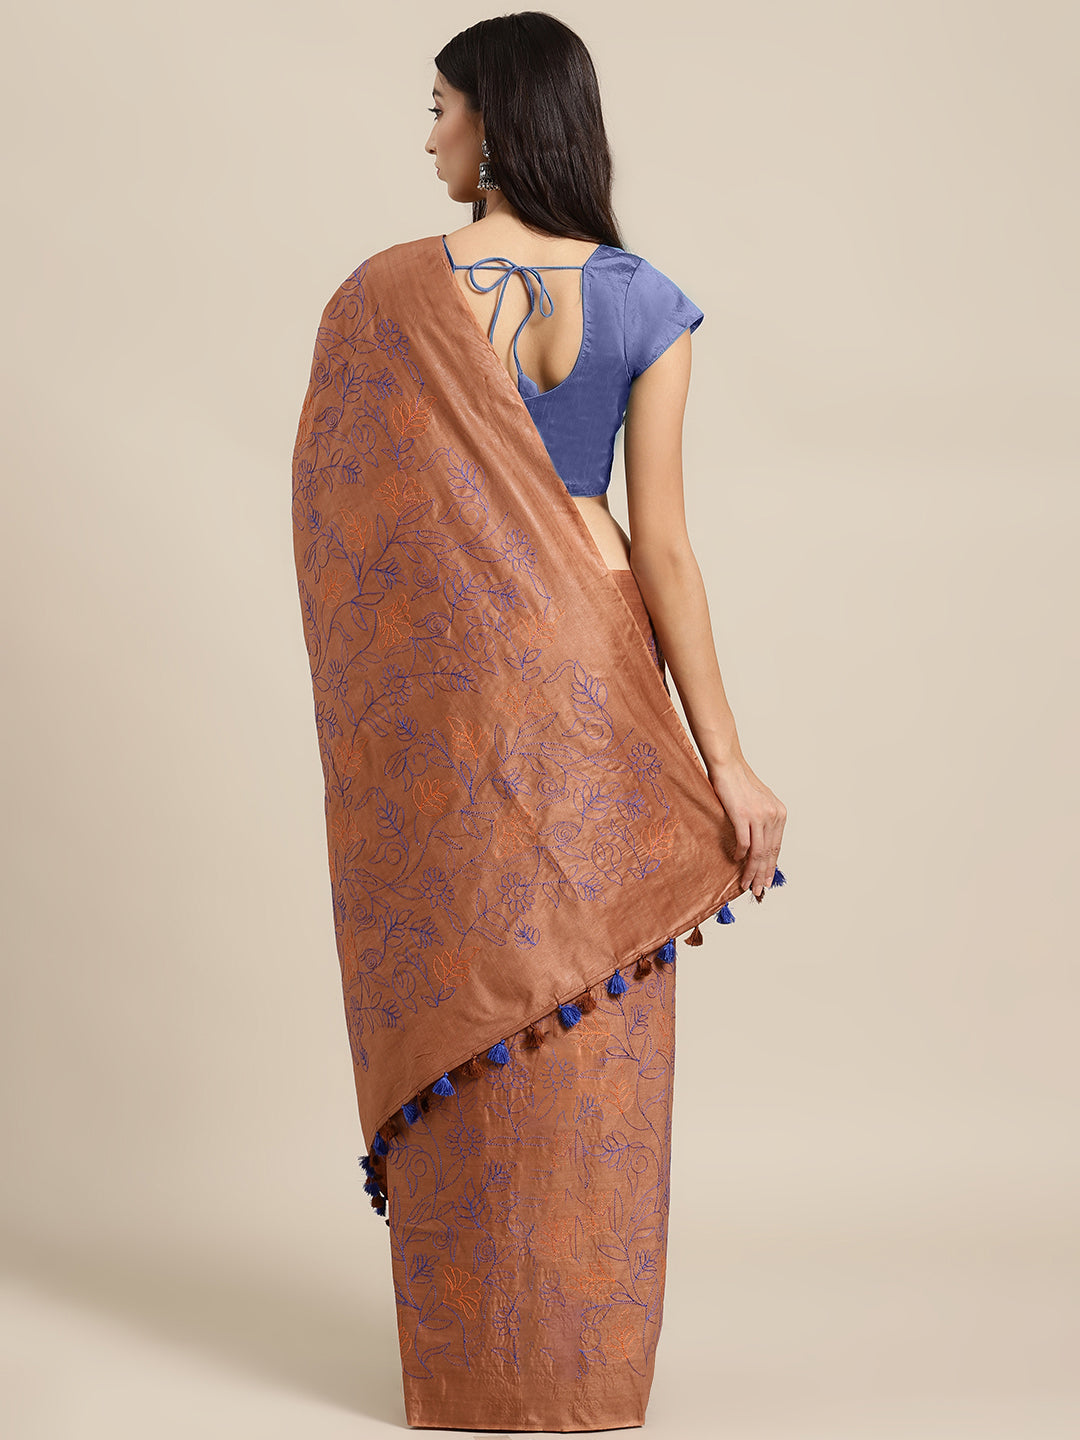 Brown and Blue, Kalakari India Bhagalpuri Silk Blend Woven Design Saree with Blouse ALBGSA0153-Saree-Kalakari India-ALBGSA0153-Bhagalpuri, Geographical Indication, Hand Crafted, Heritage Prints, Jute, Natural Dyes, Red, Sarees, Silk Blend, Sustainable Fabrics, Woven, Yellow-[Linen,Ethnic,wear,Fashionista,Handloom,Handicraft,Indigo,blockprint,block,print,Cotton,Chanderi,Blue, latest,classy,party,bollywood,trendy,summer,style,traditional,formal,elegant,unique,style,hand,block,print, dabu,booti,gif